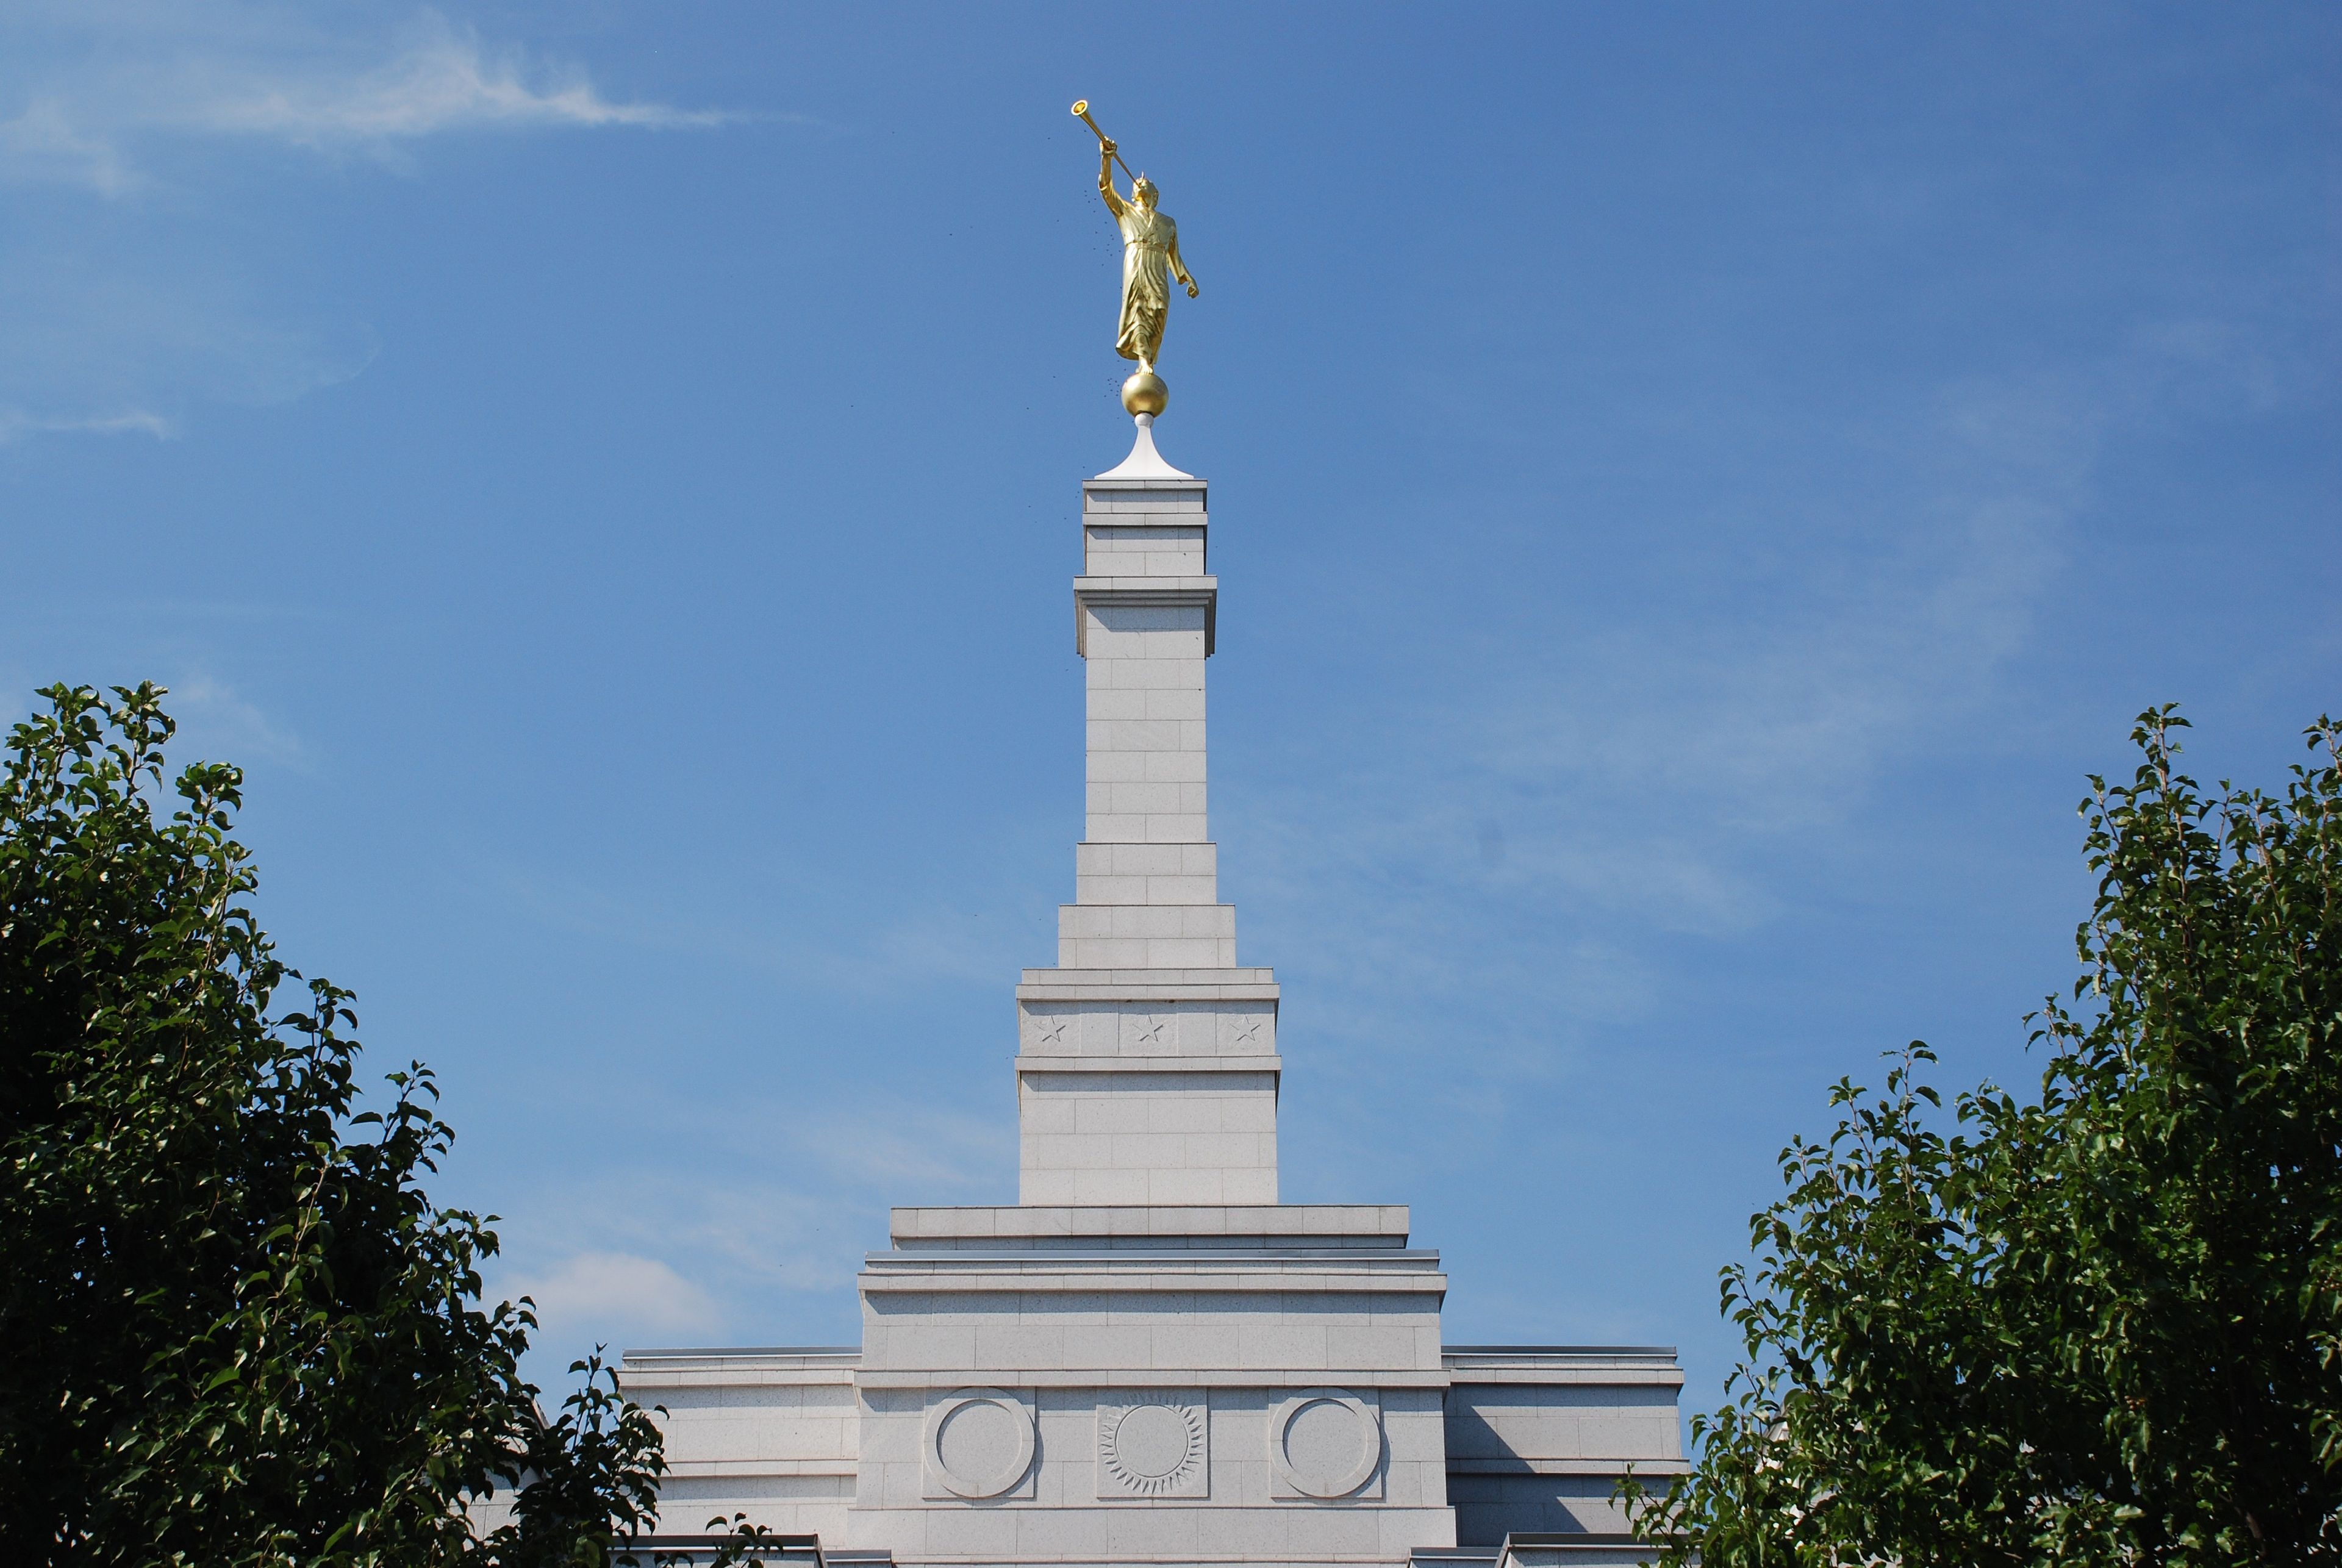 An image of the spire on the Palmyra New York Temple, with the angel Moroni on top.